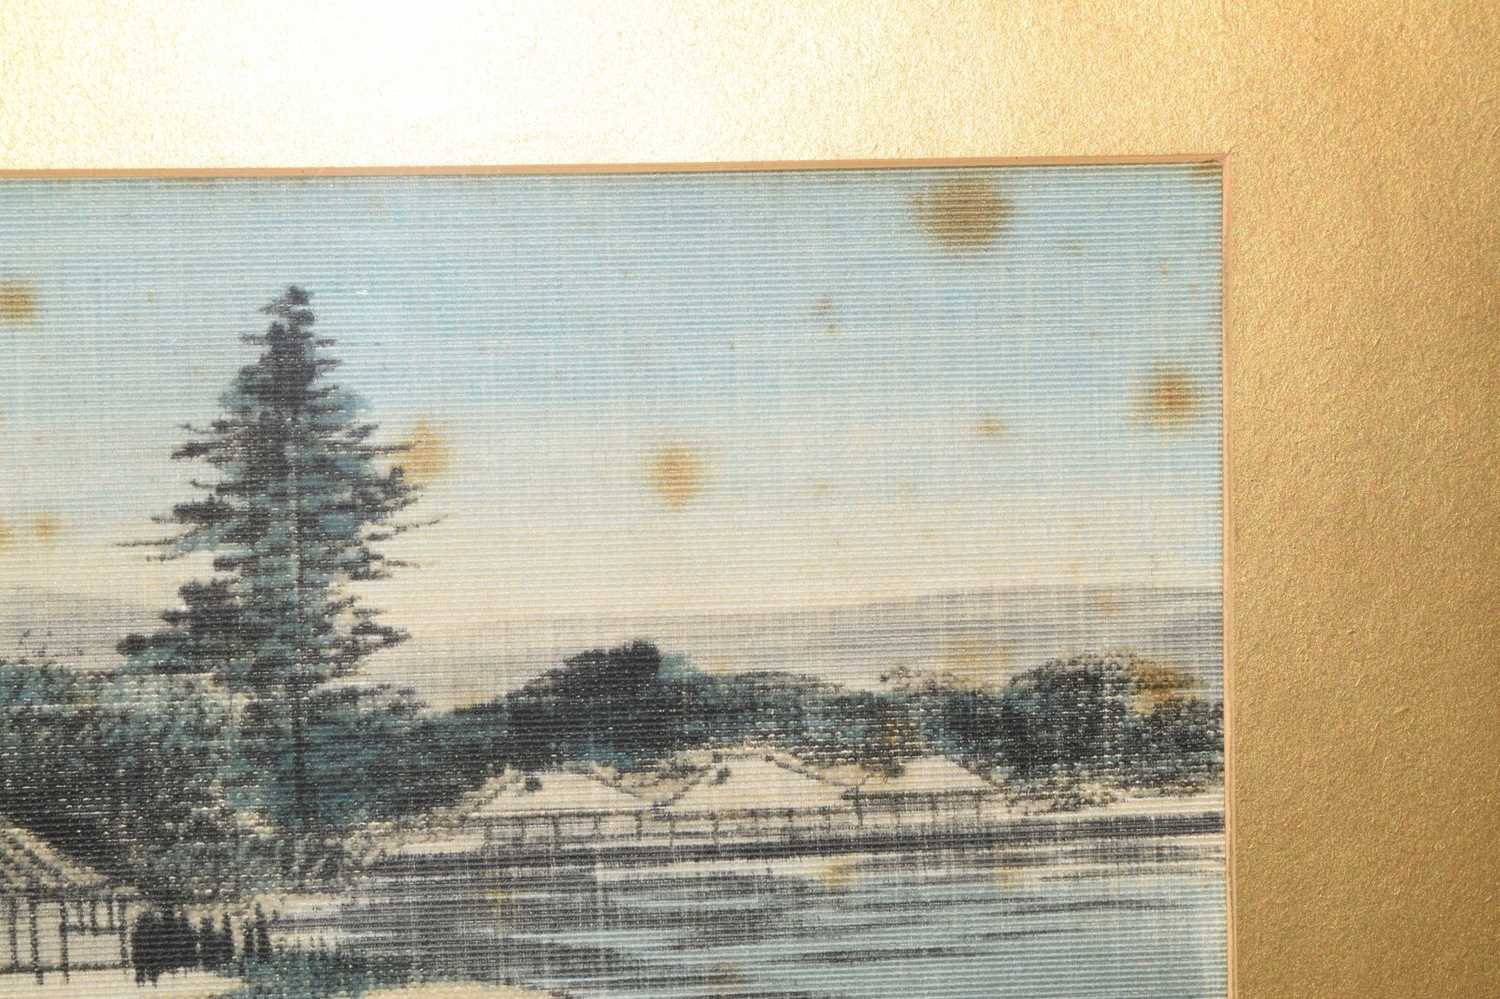 Early 20th century Japanese folding table screen with view of Mount Fuji - Image 7 of 33